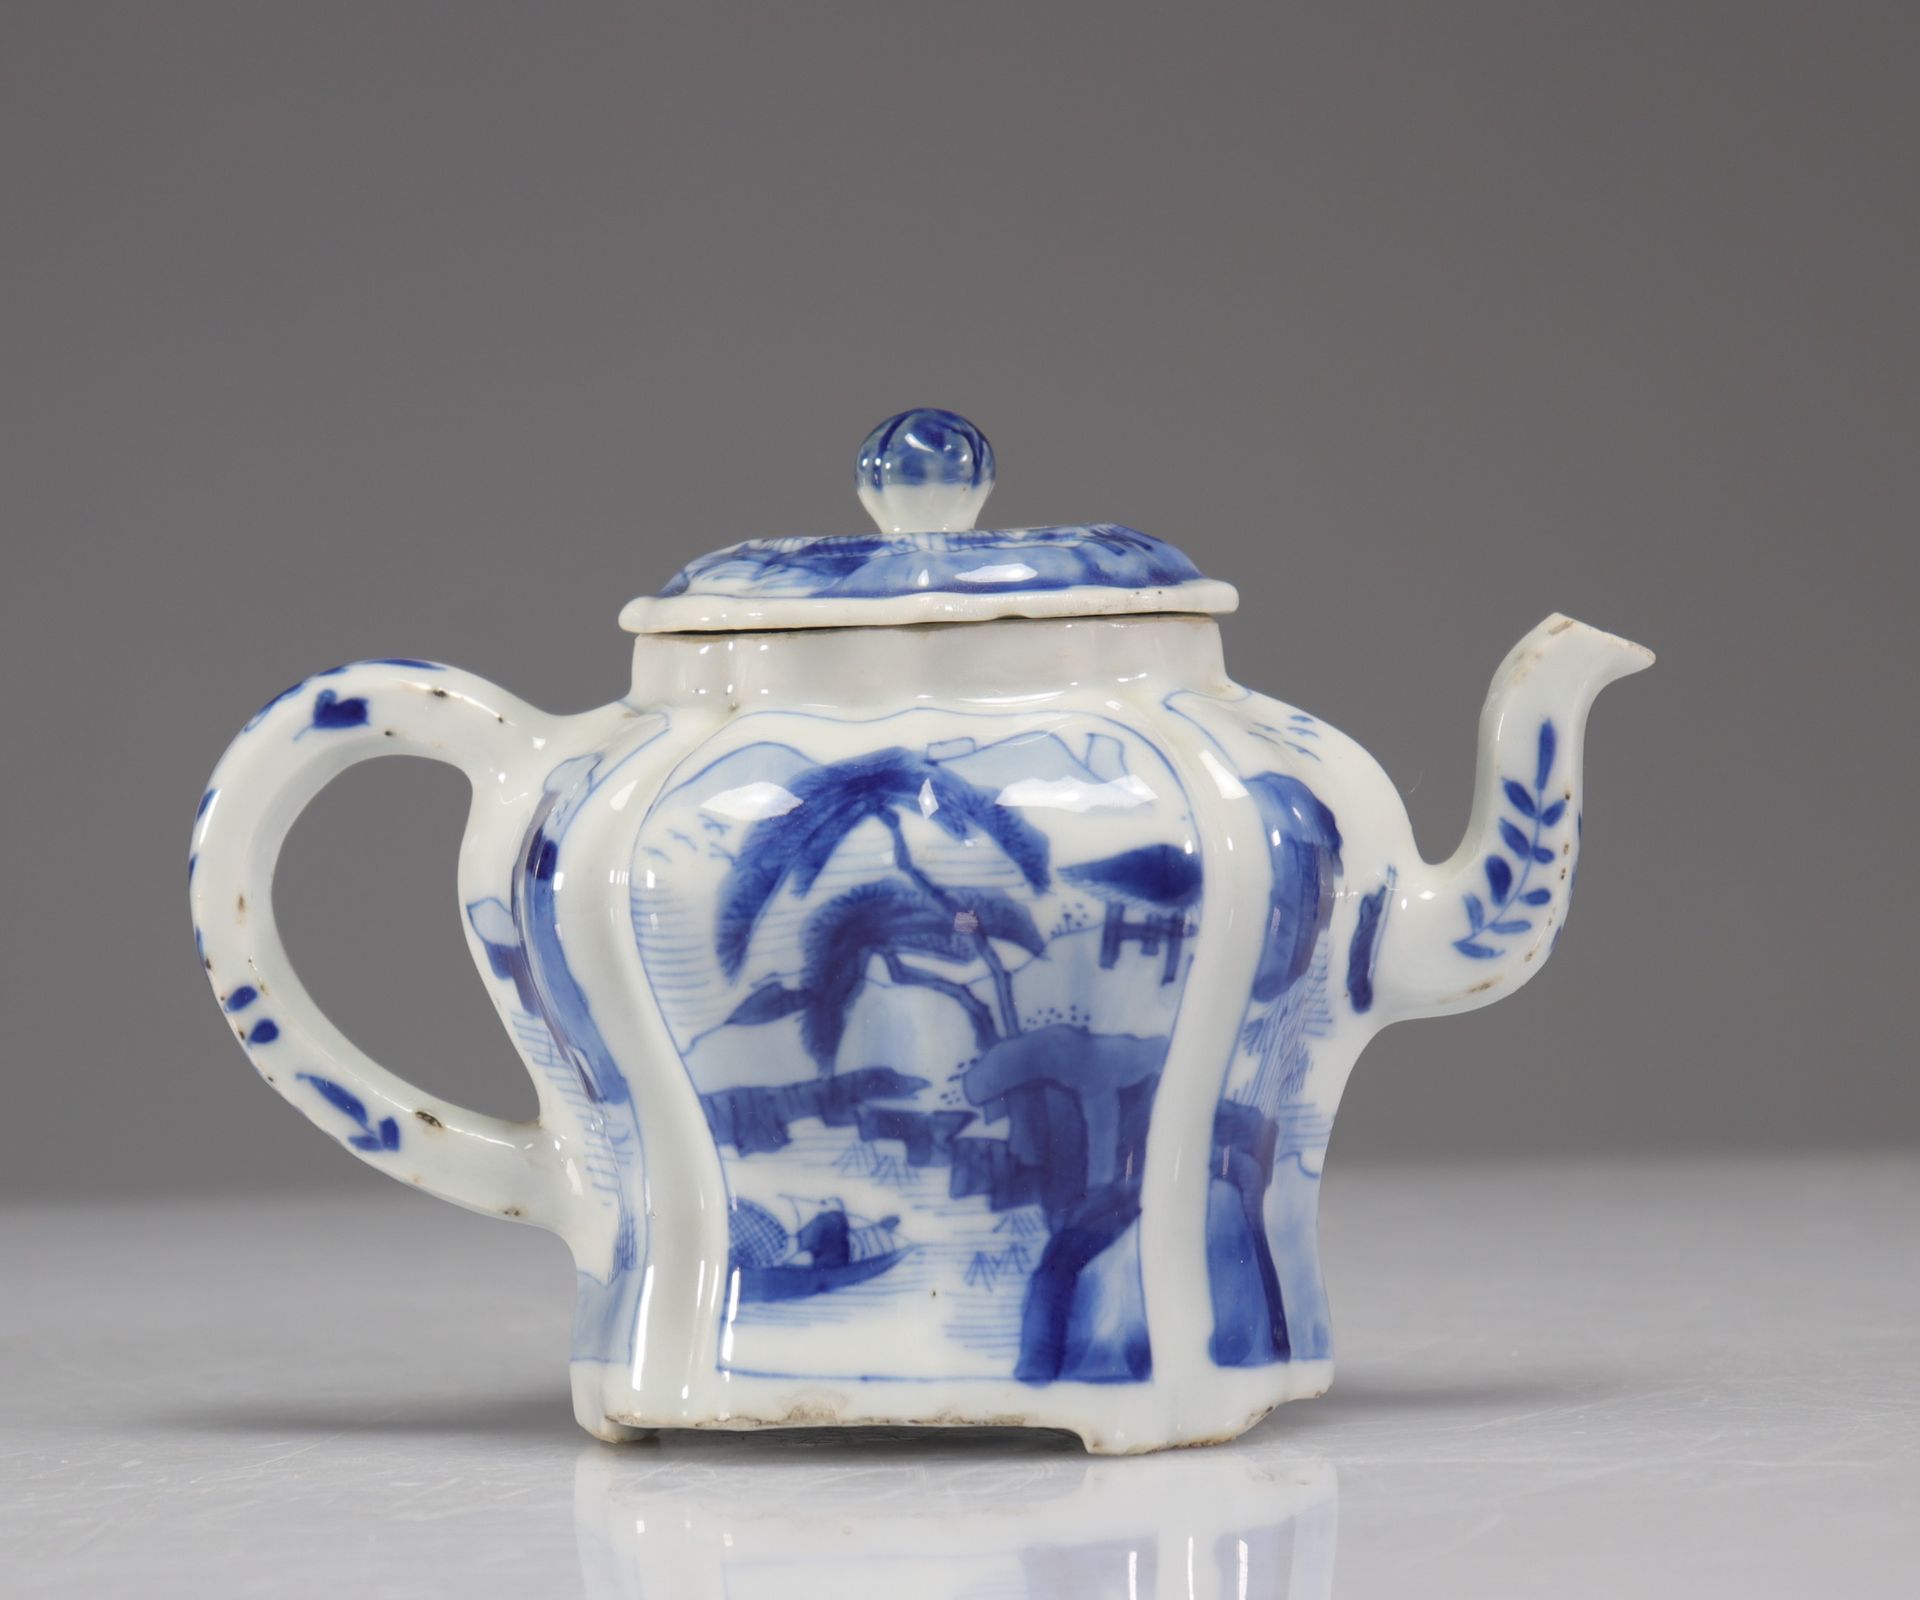 Null White and blue teapot 18th century
Weight: 0 g
Region: China